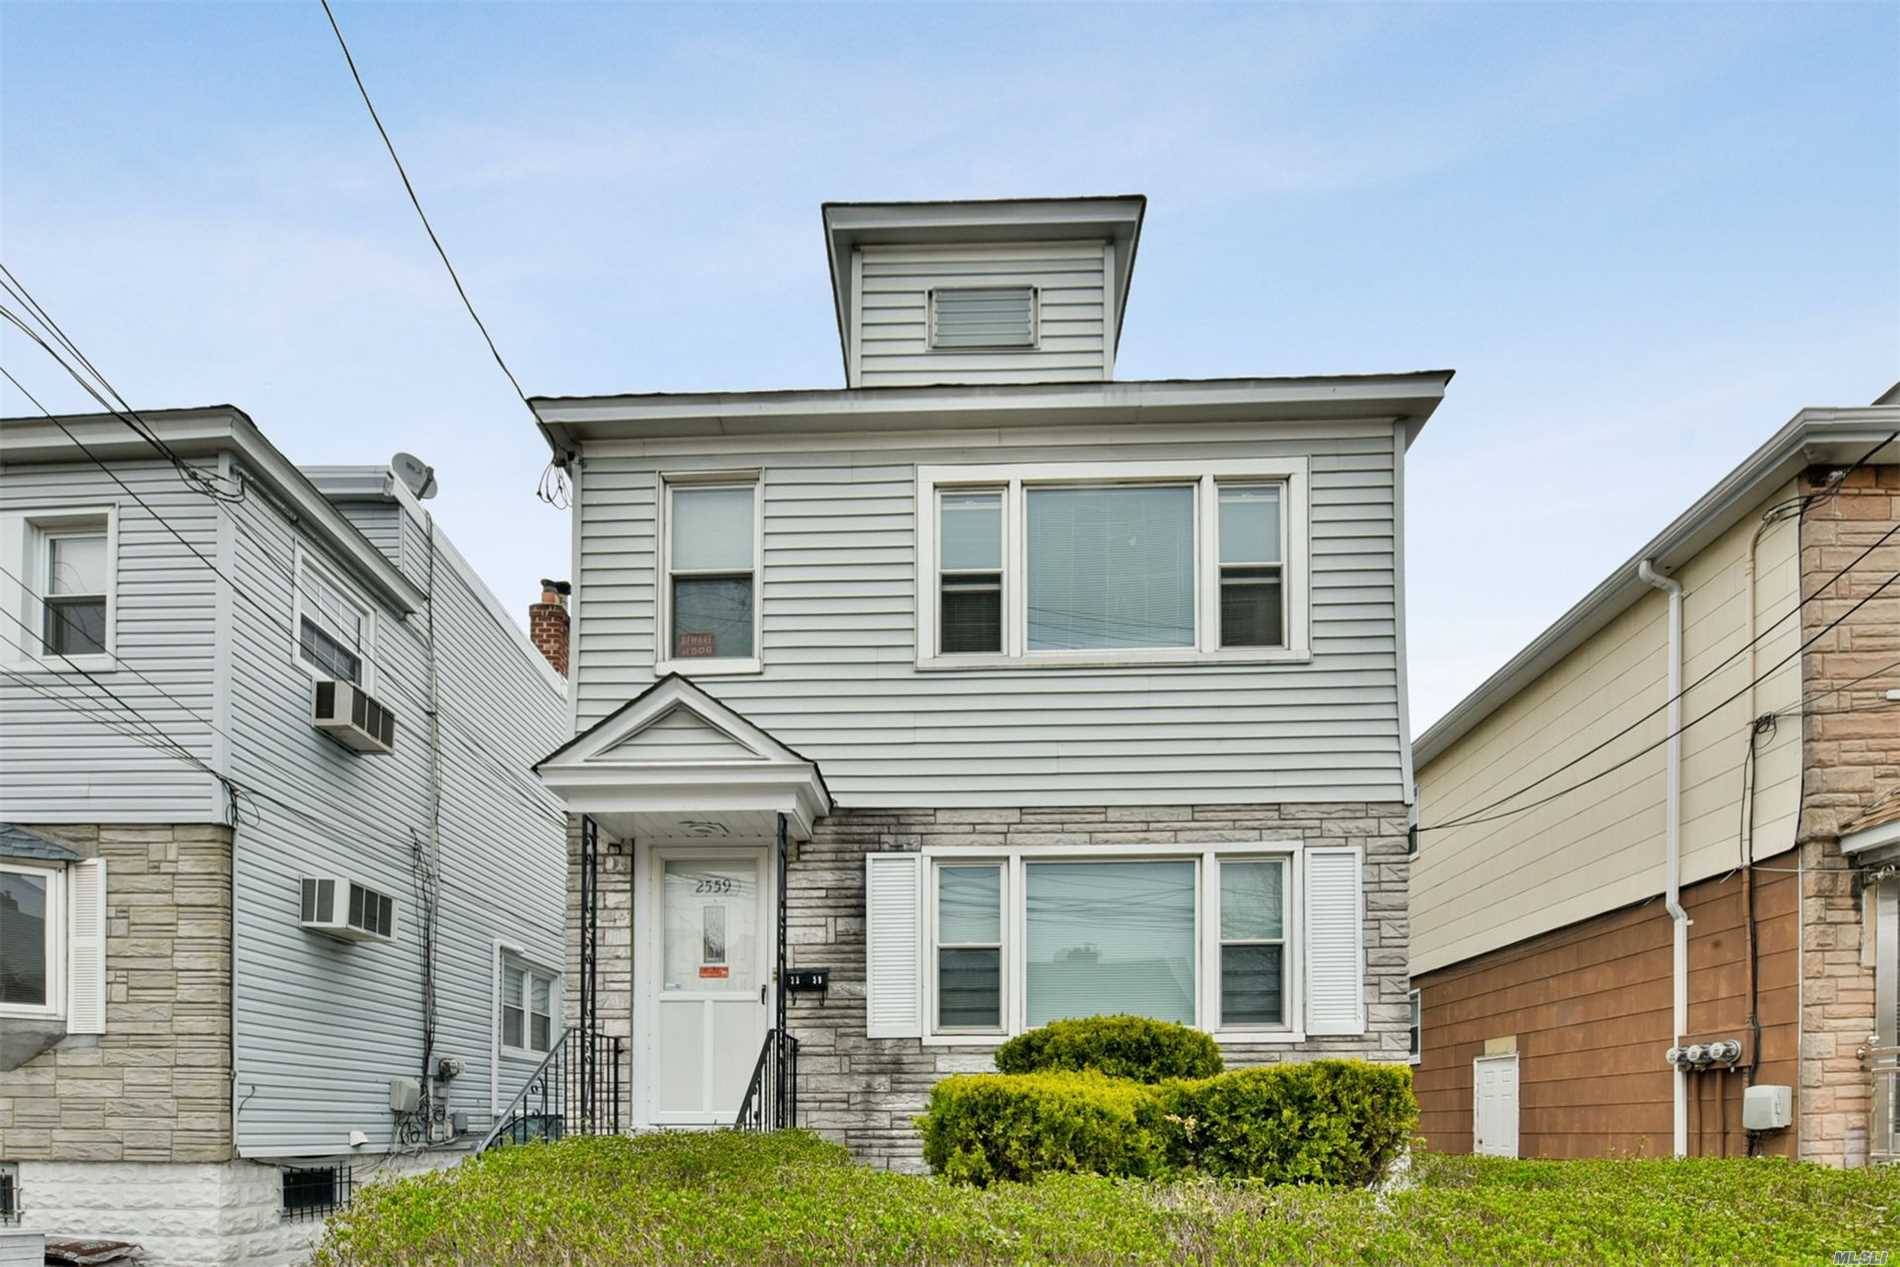 Legal 2 Family Colonial Located In Flushing.